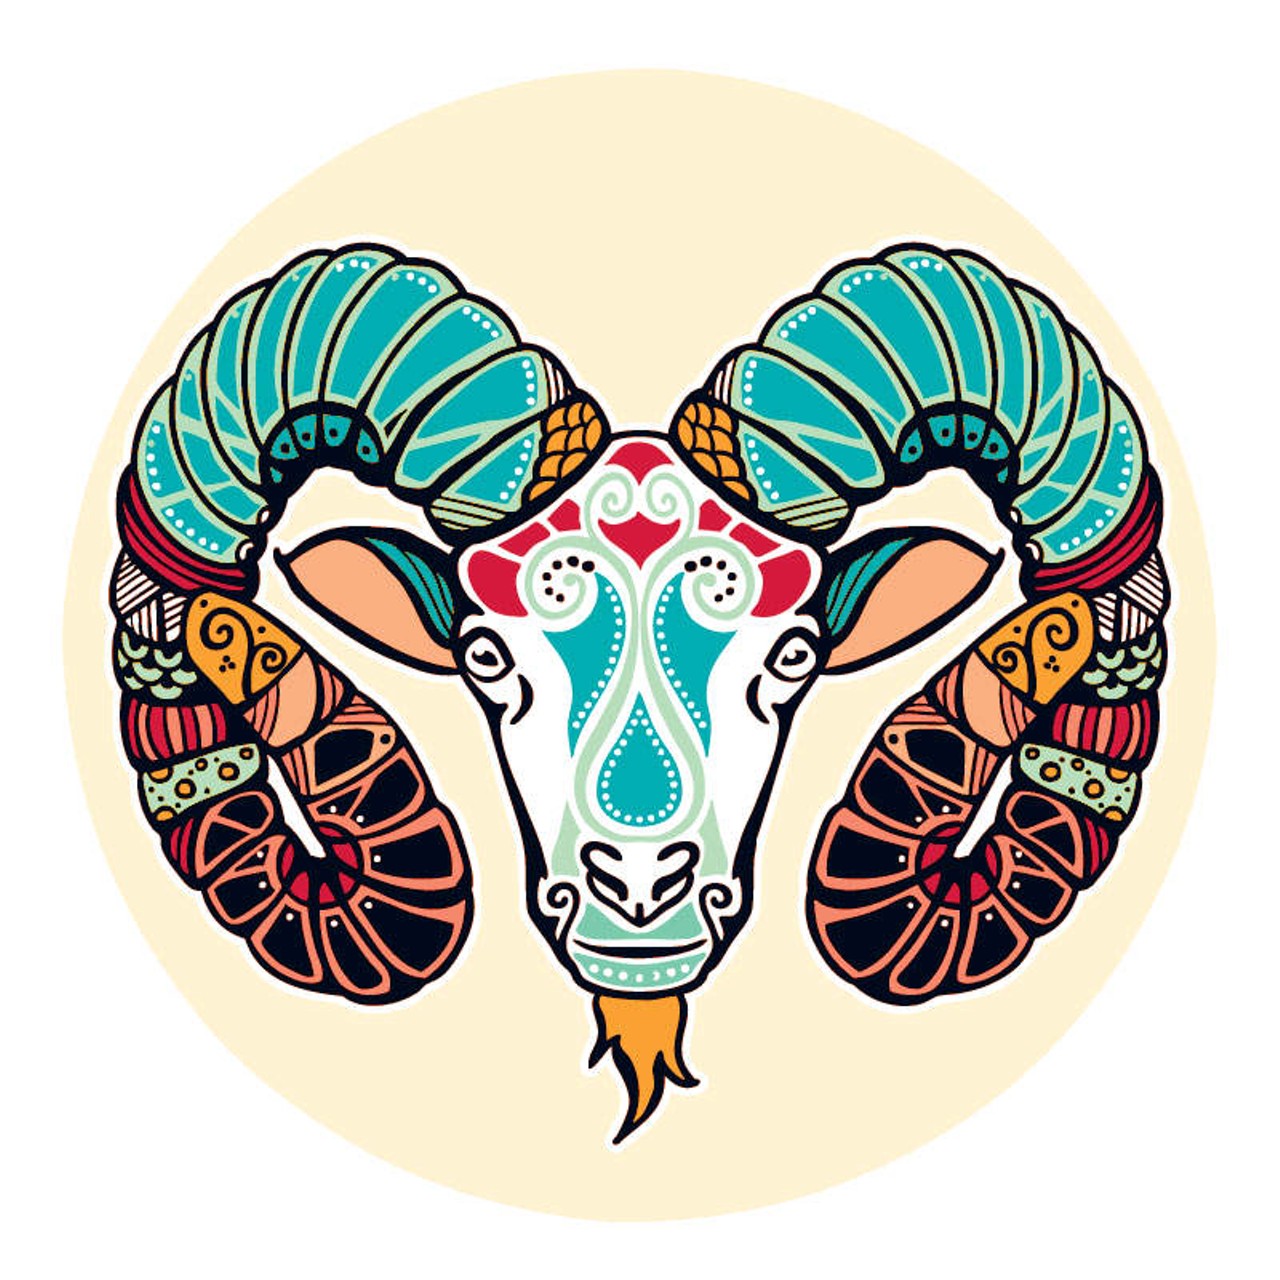 ARIES (March 21- April 20): 
Too much of the past has come to bear on the present, and your pride can&#146;t take any more reminders of what didn&#146;t go right. For the longest time you&#146;ve felt a need to start all over again. With not enough support and too many debts, you haven&#146;t been able to budge until now. As much as it pains you to have to do this, you not only see that it&#146;s what&#146;s best for everyone, you&#146;re totally clear that you&#146;ve got nothing to lose. When it comes time to change, trust that you will have plenty of support and that others will benefit as much from your decision as you do.